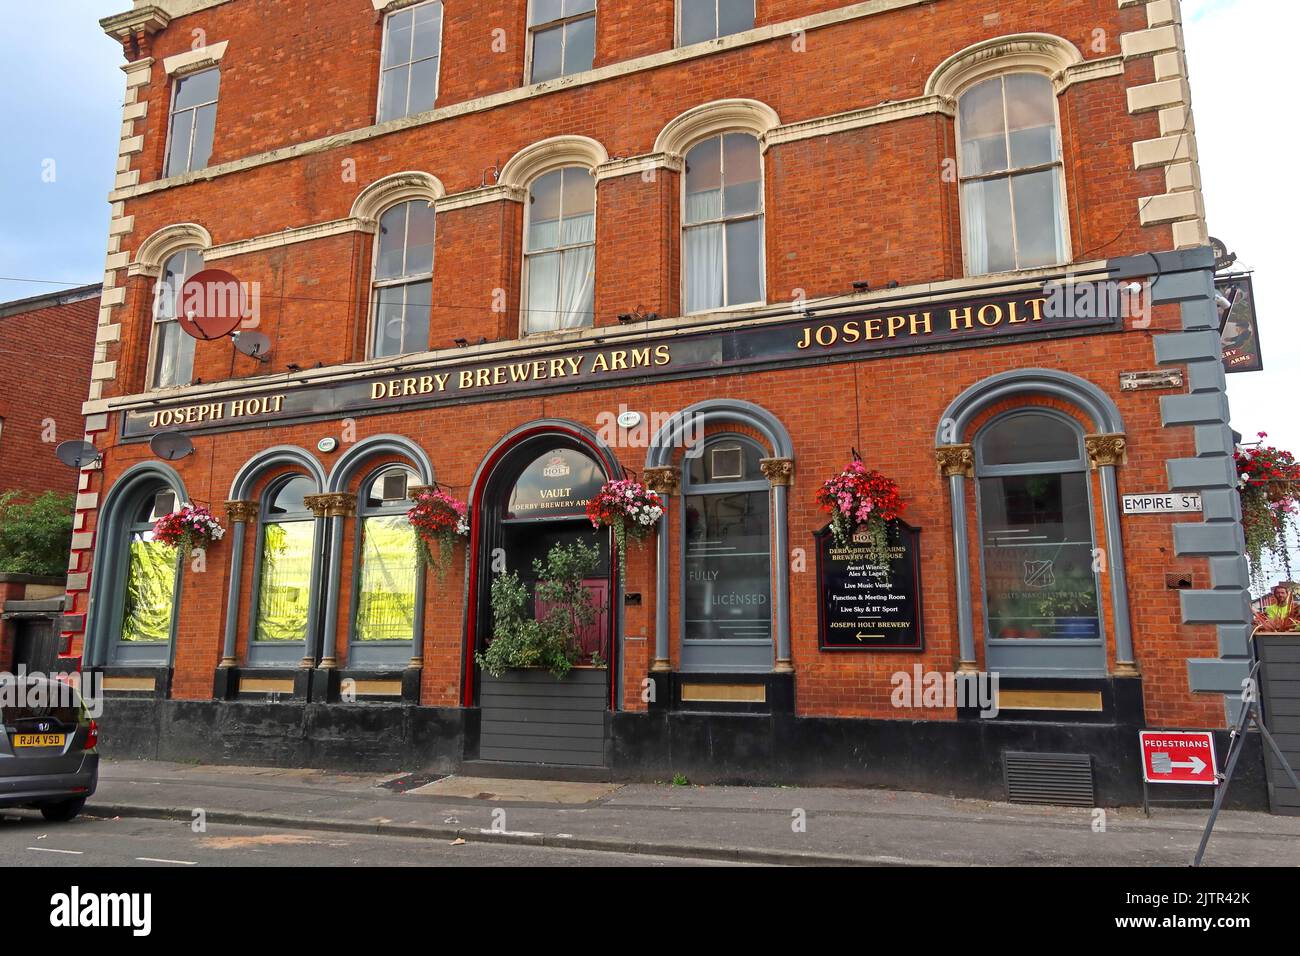 Holts Derby Brewery Arms, Empire St, Cheetham Hill, Manchester, England, UK, M3 1JA Stock Photo